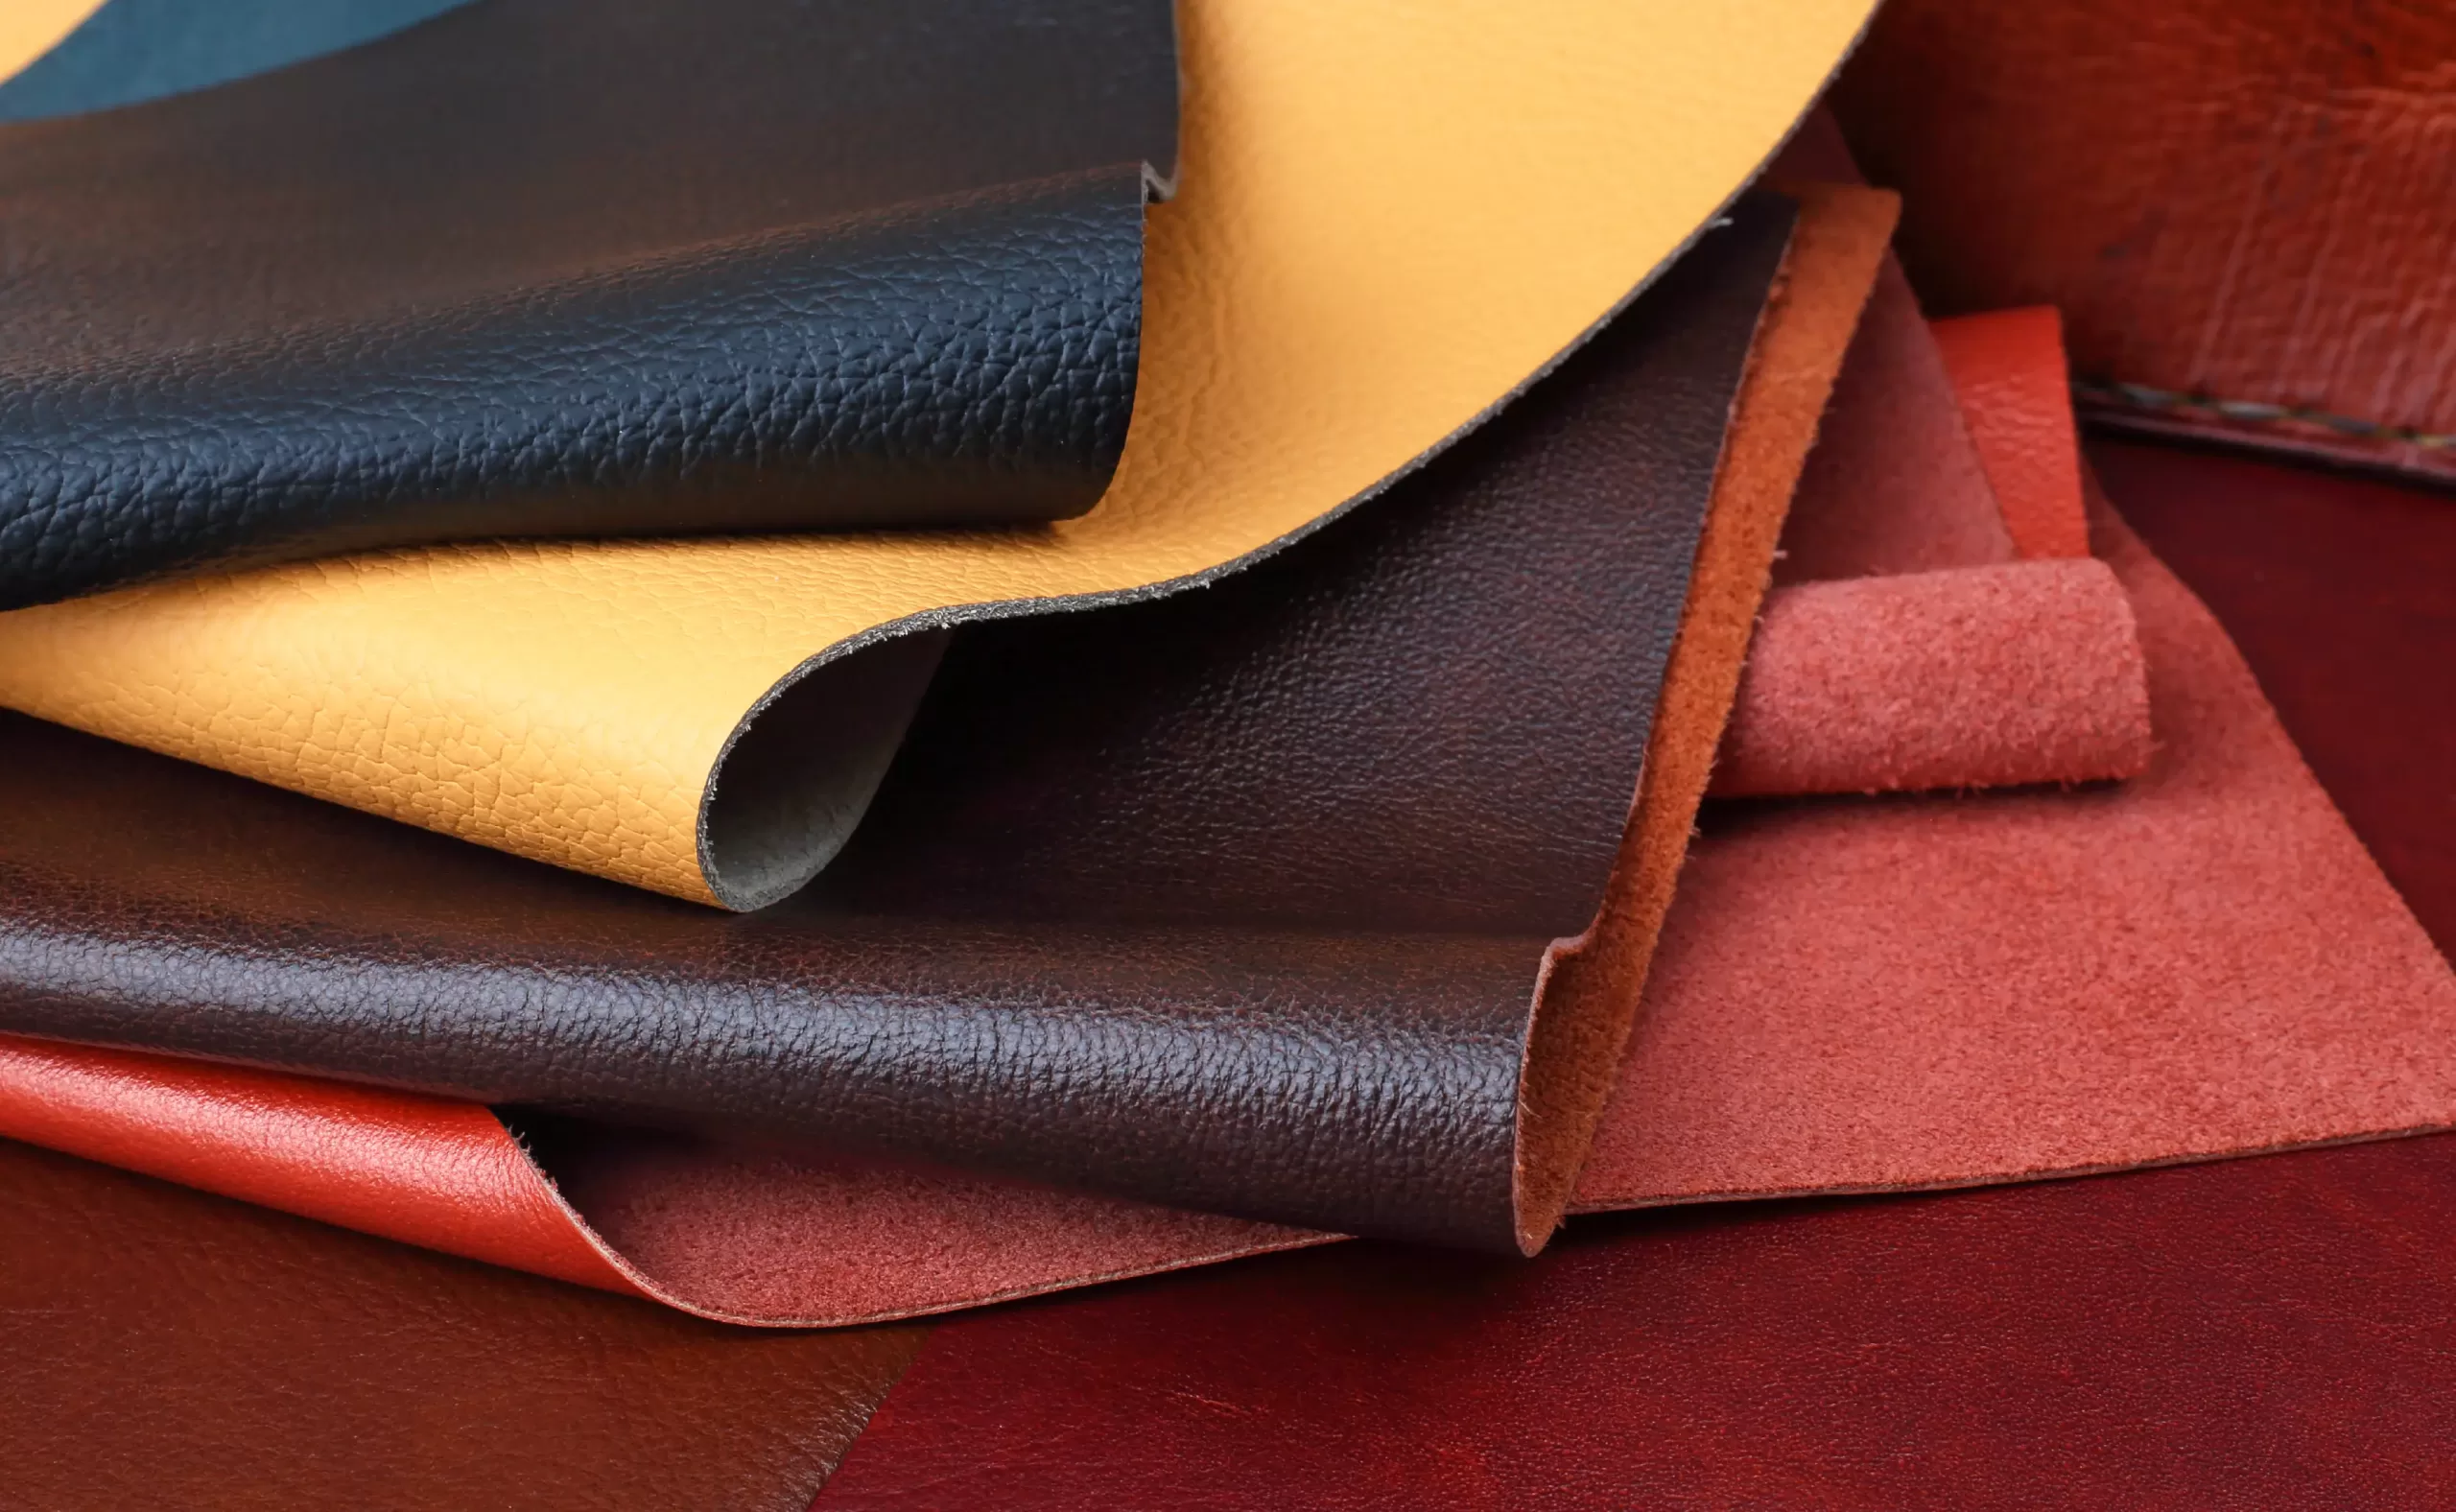 Different types of leather skins, colorful and textured.